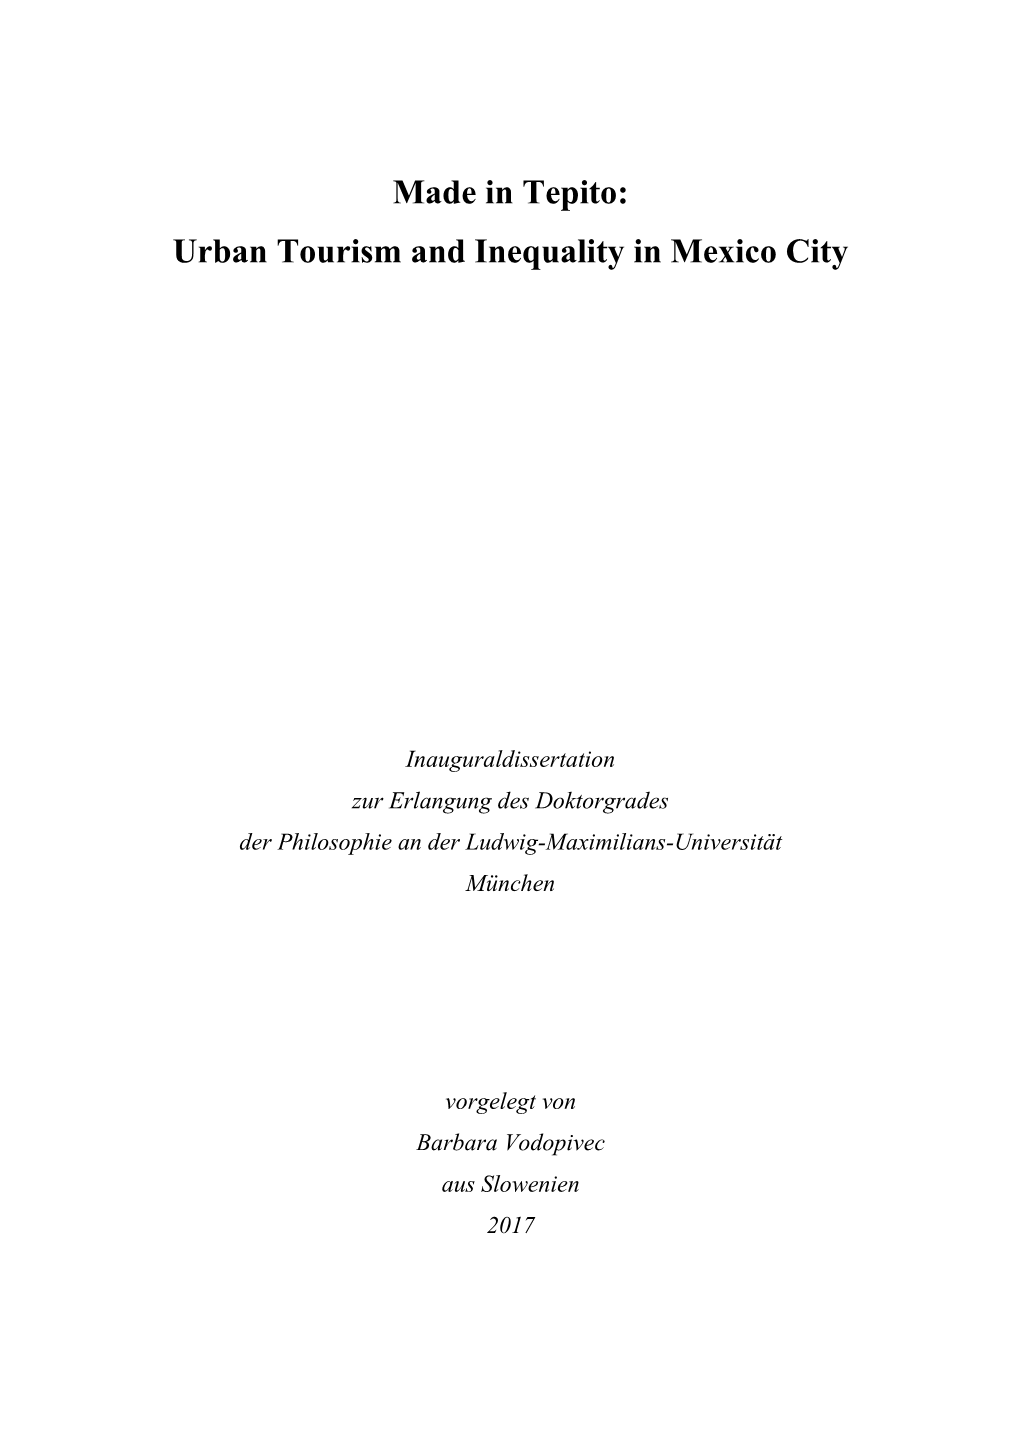 Made in Tepito: Urban Tourism and Inequality in Mexico City